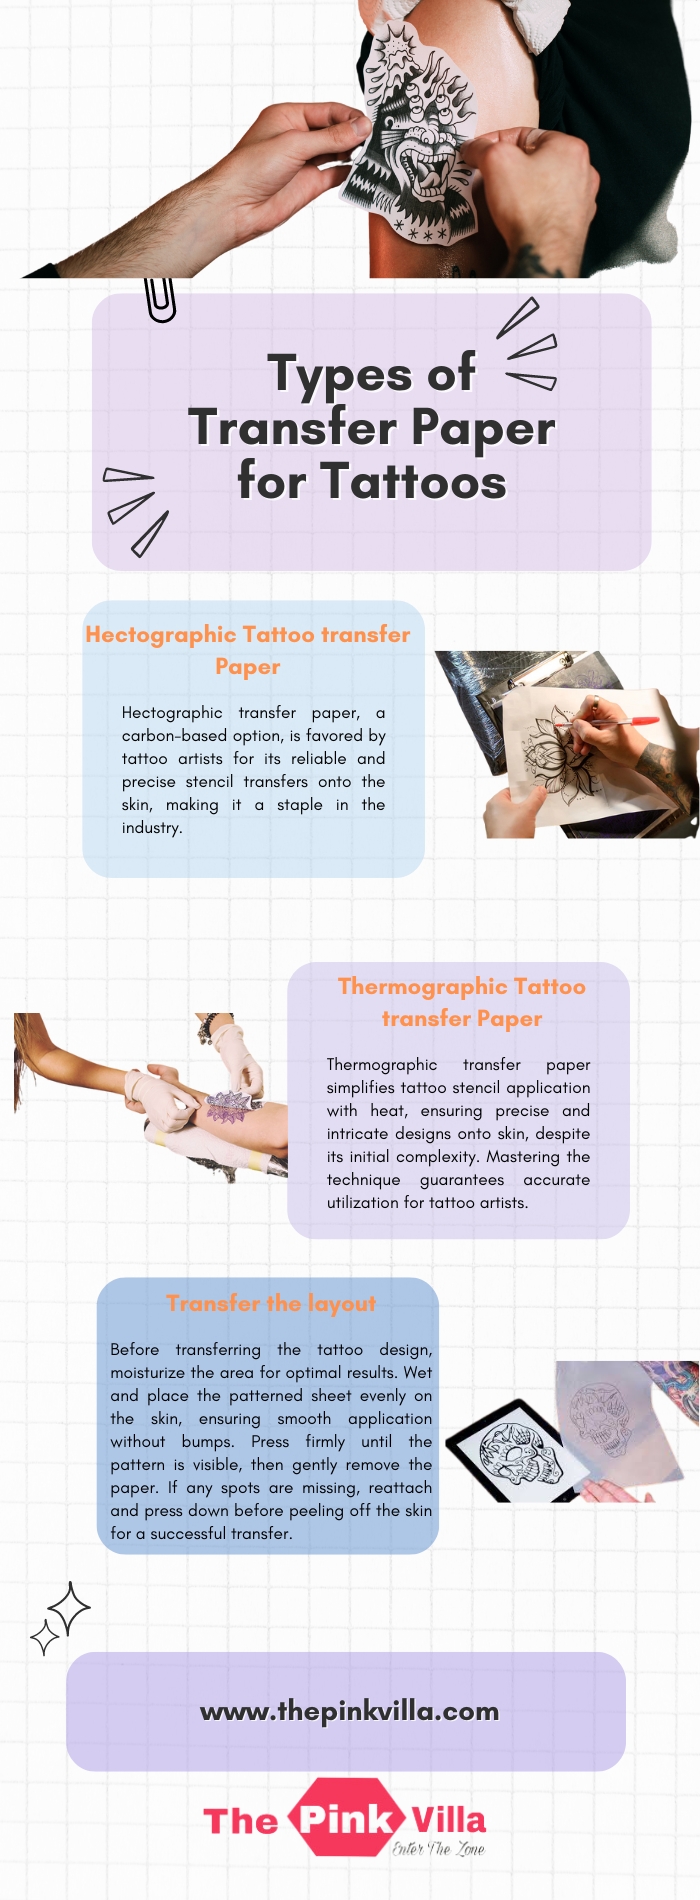 Types of Transfer Paper for Tattoos